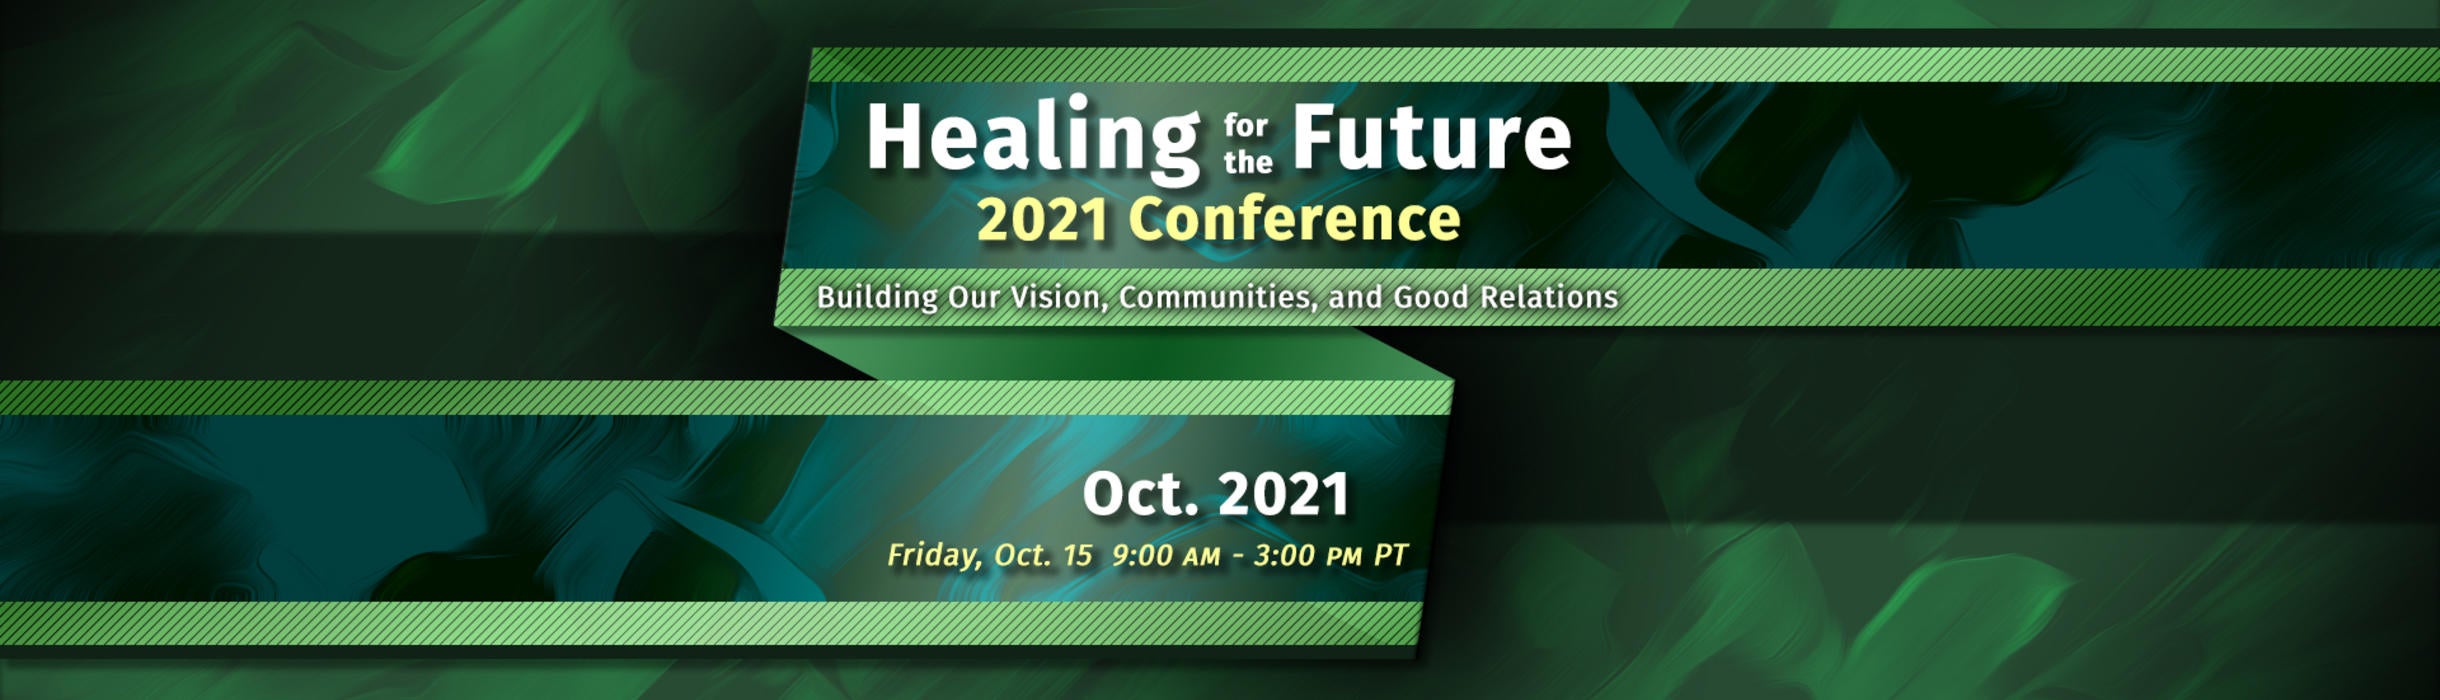 Healing for the Future 2021 Conference